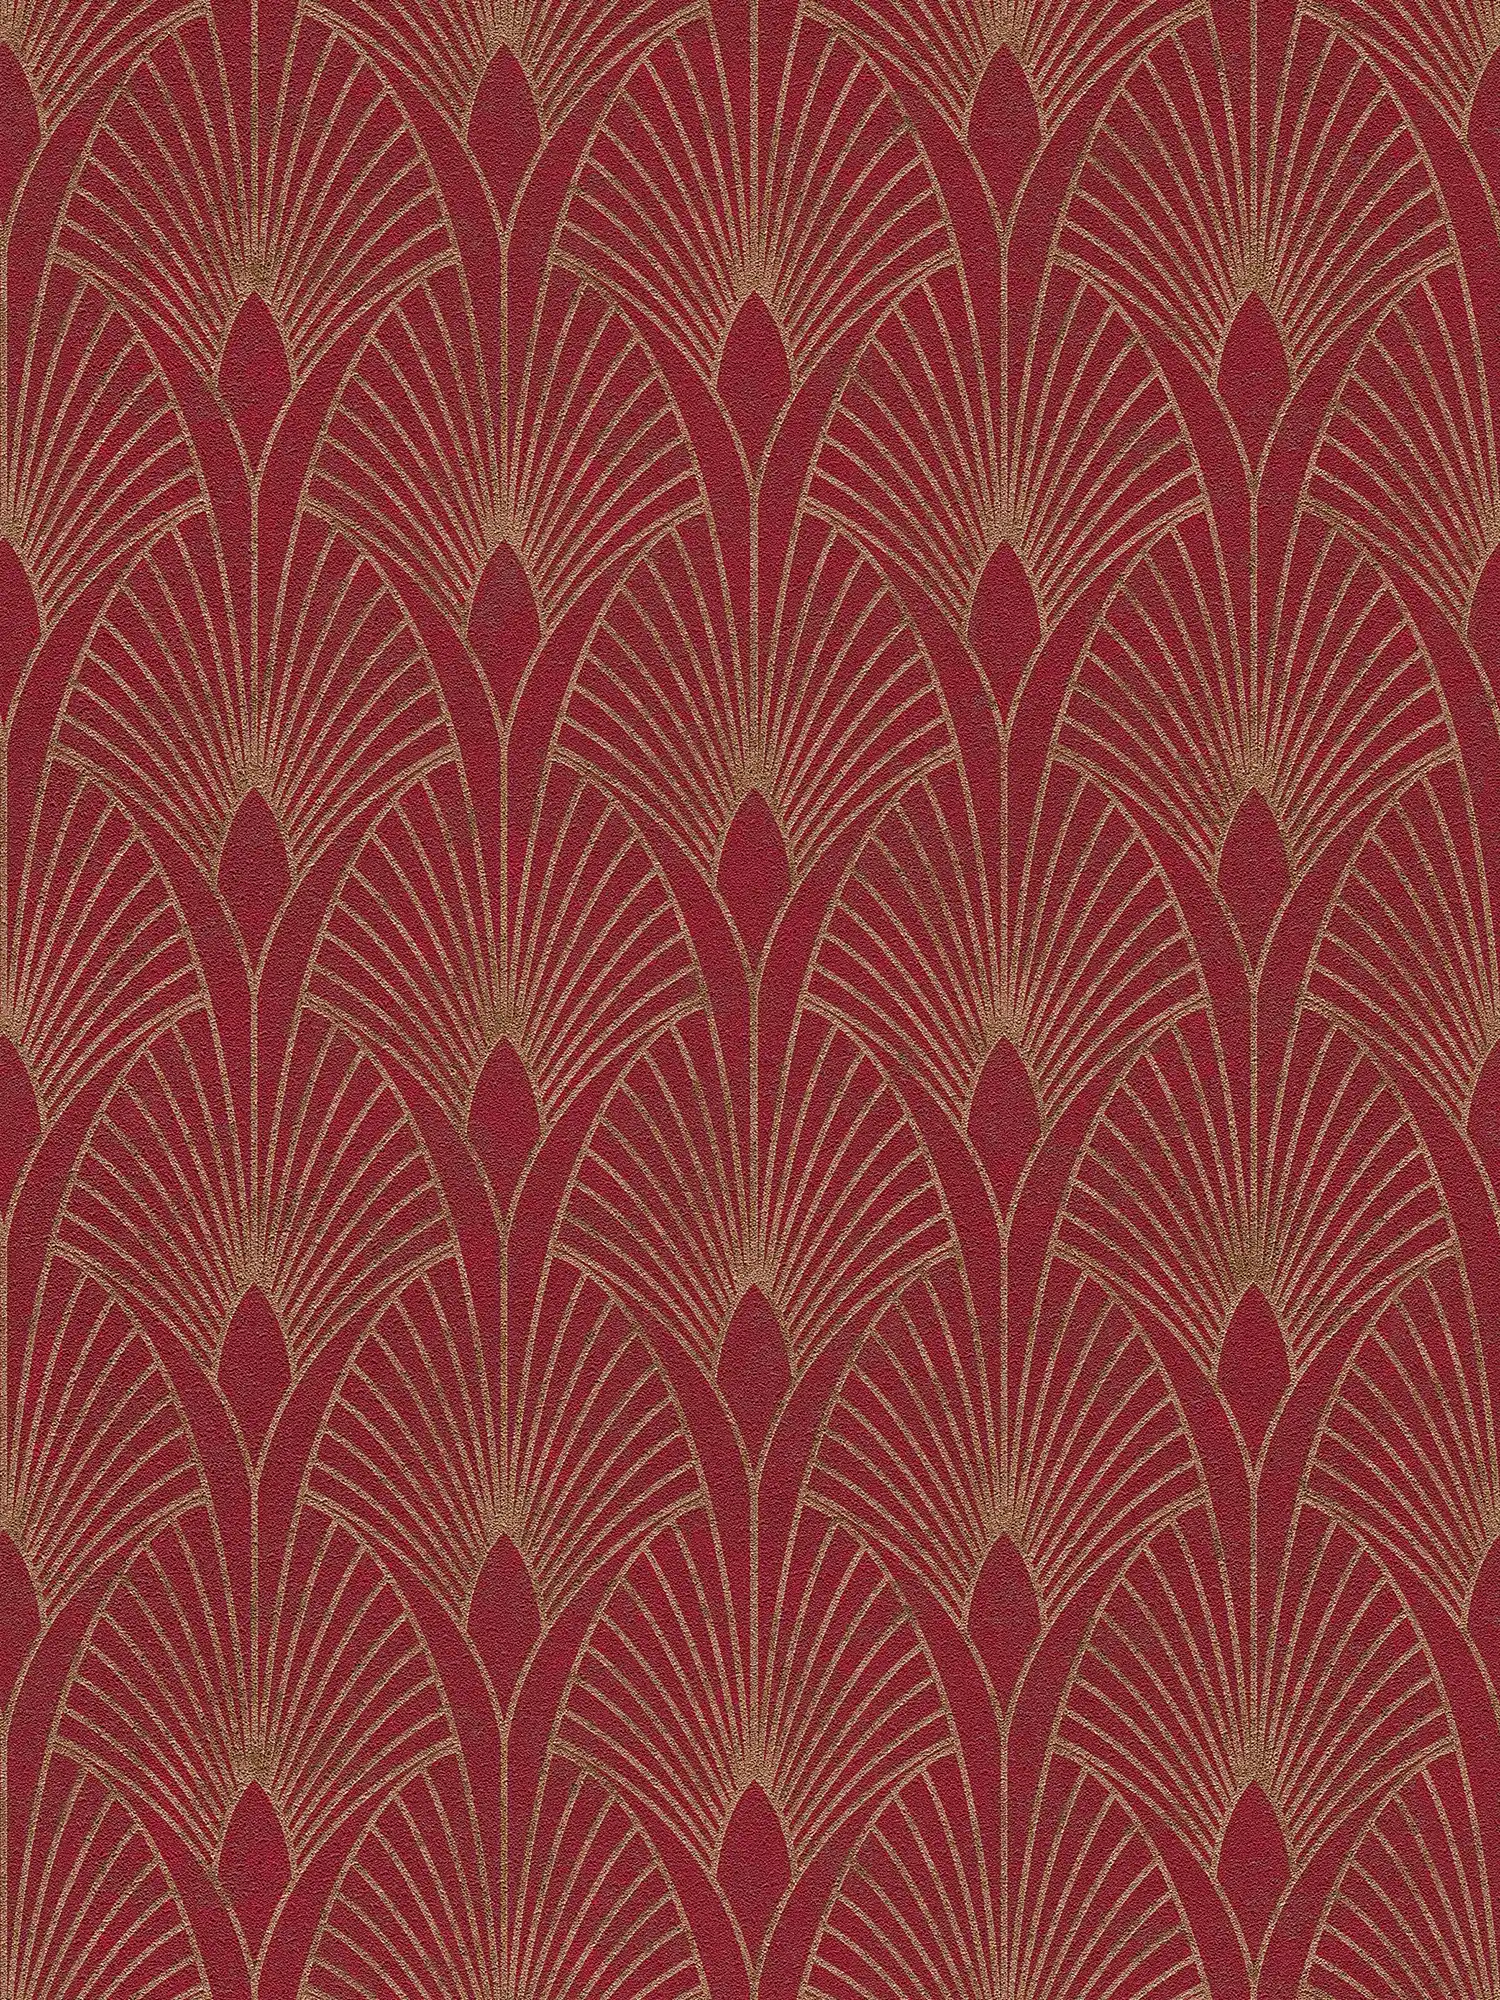         Art Déco Tapete goldenes Retro Muster – Rot, Gold
    